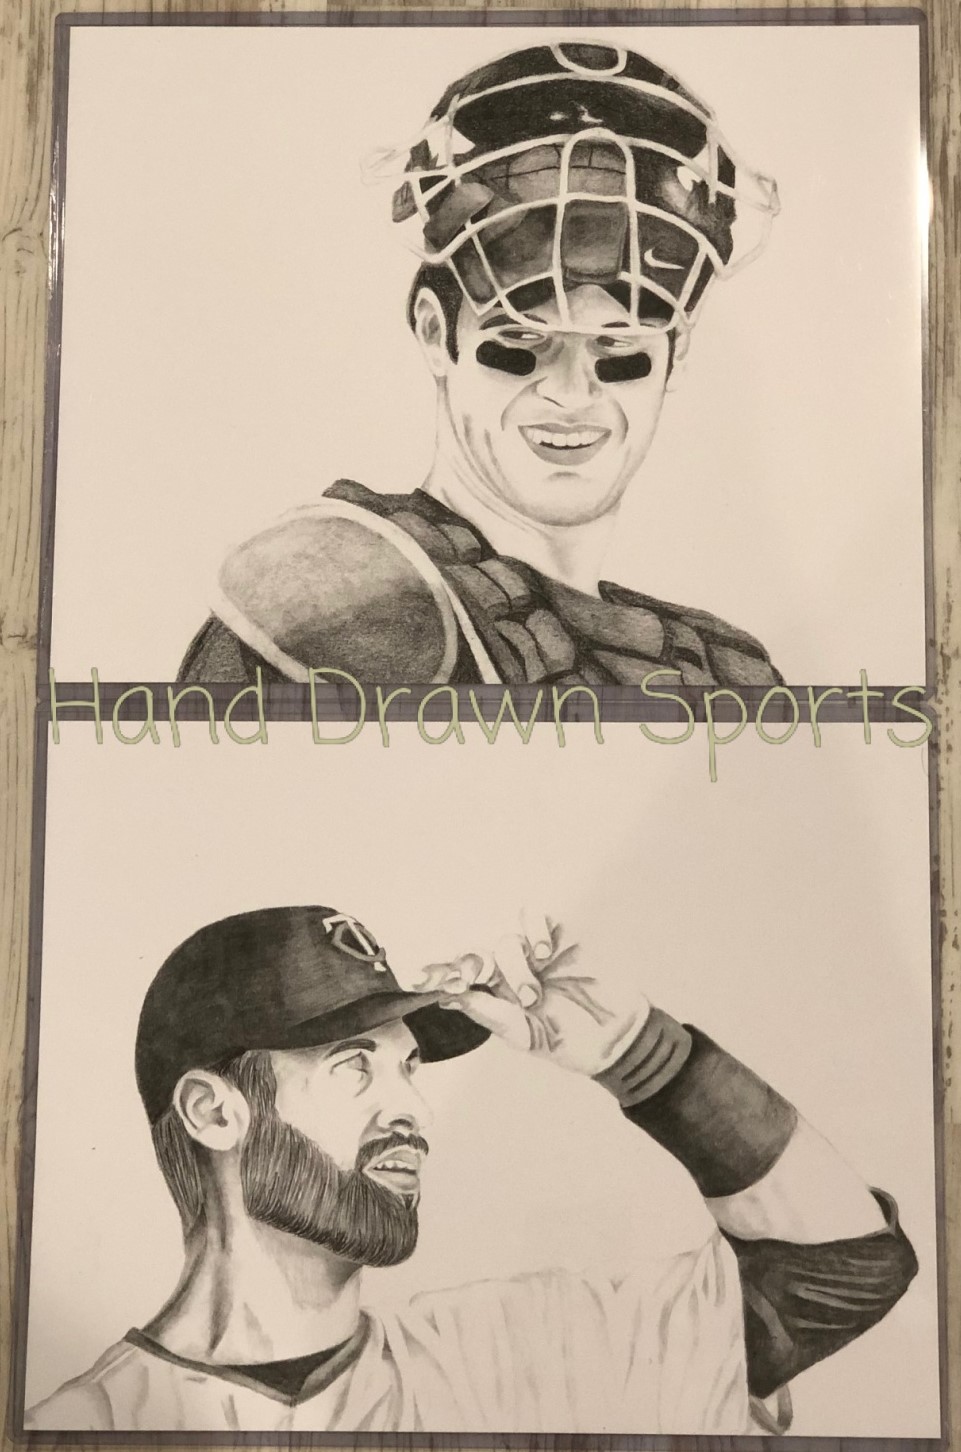 Joe Mauer Special : Catching and Tipping His Cap - Set of 2 11x14 Prints